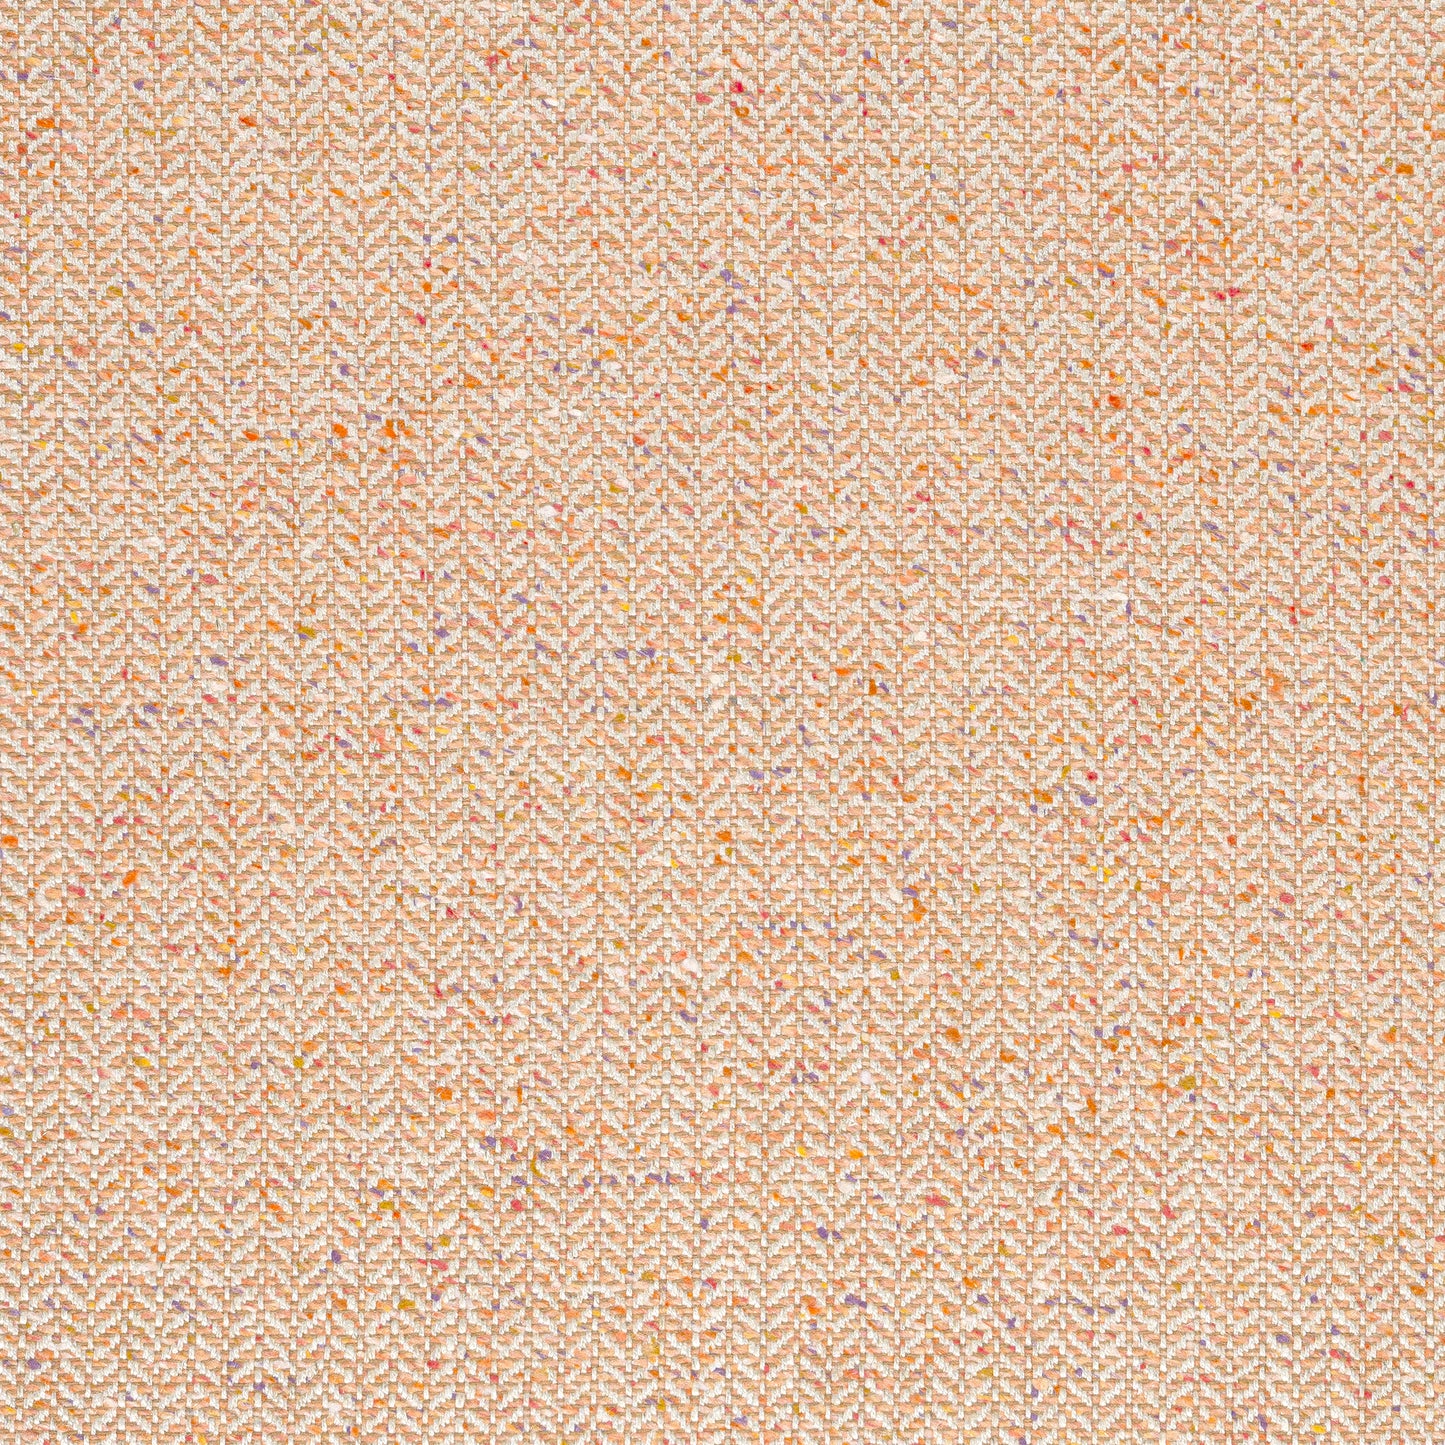 Purchase Thibaut Fabric Product W80926 pattern name Heath color Apricot